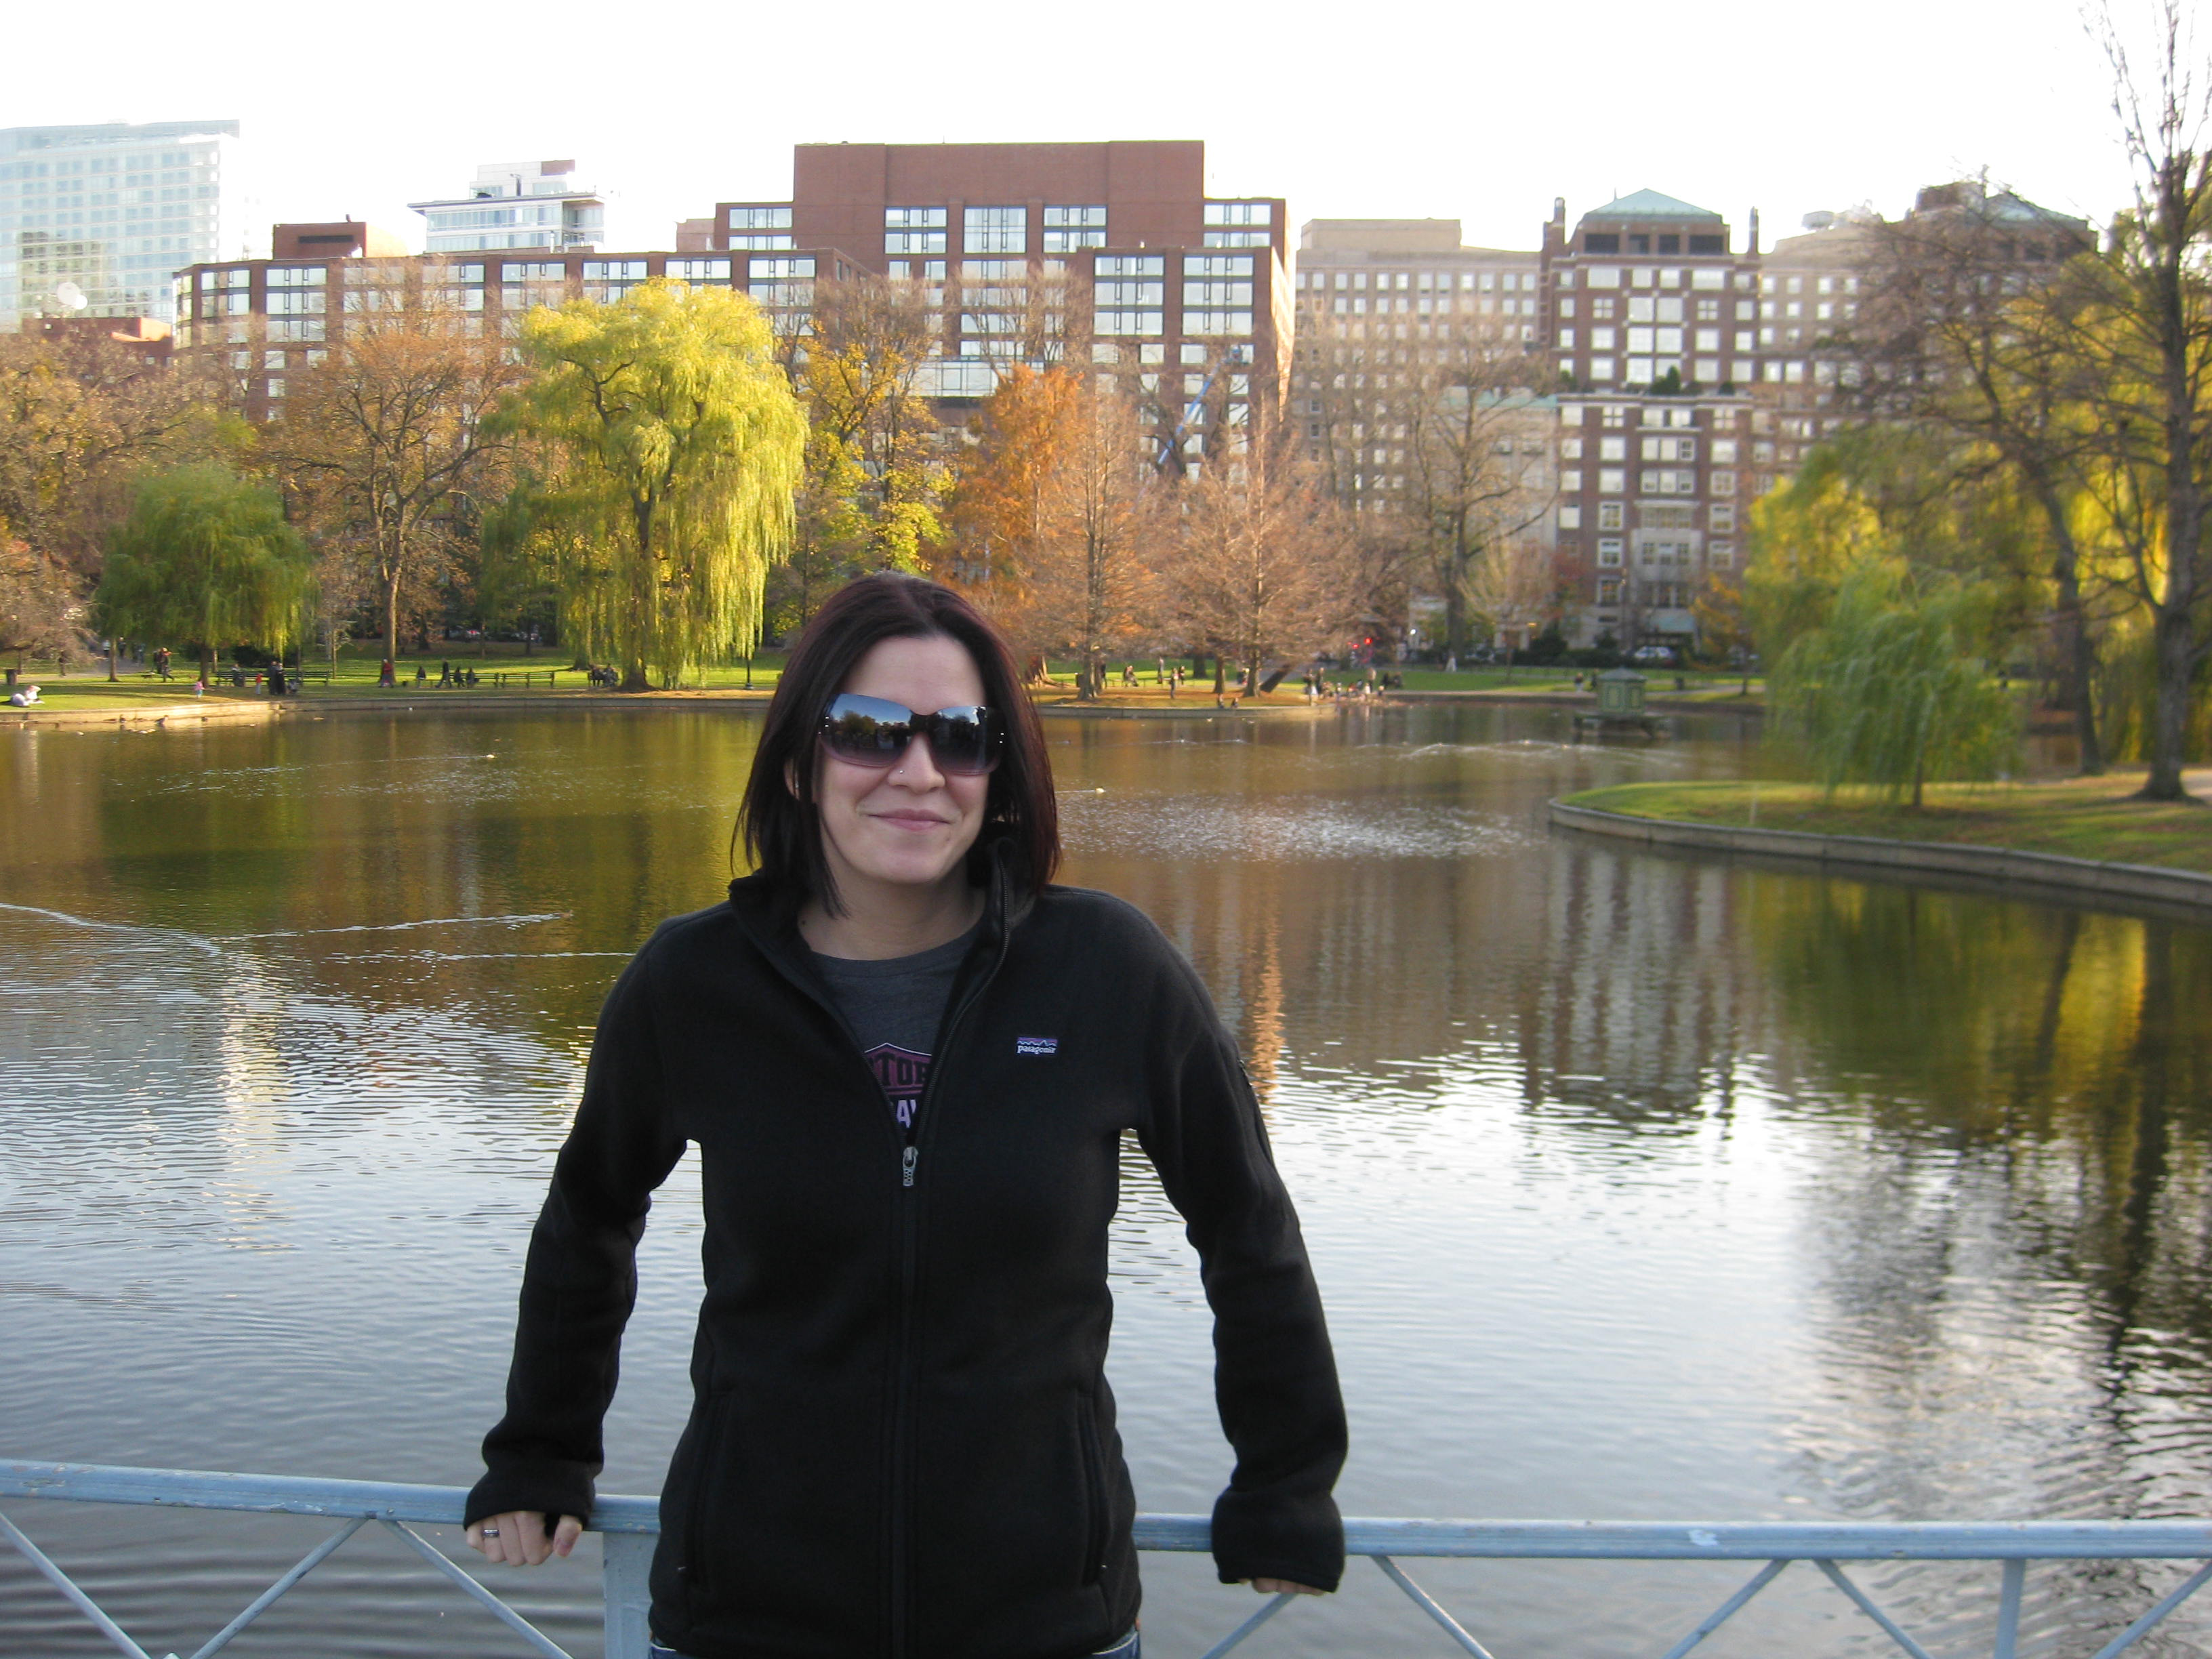 A brunette woman in a black zippered sweater wearing sunglasses and standing in front of a body of water with trees in the background.